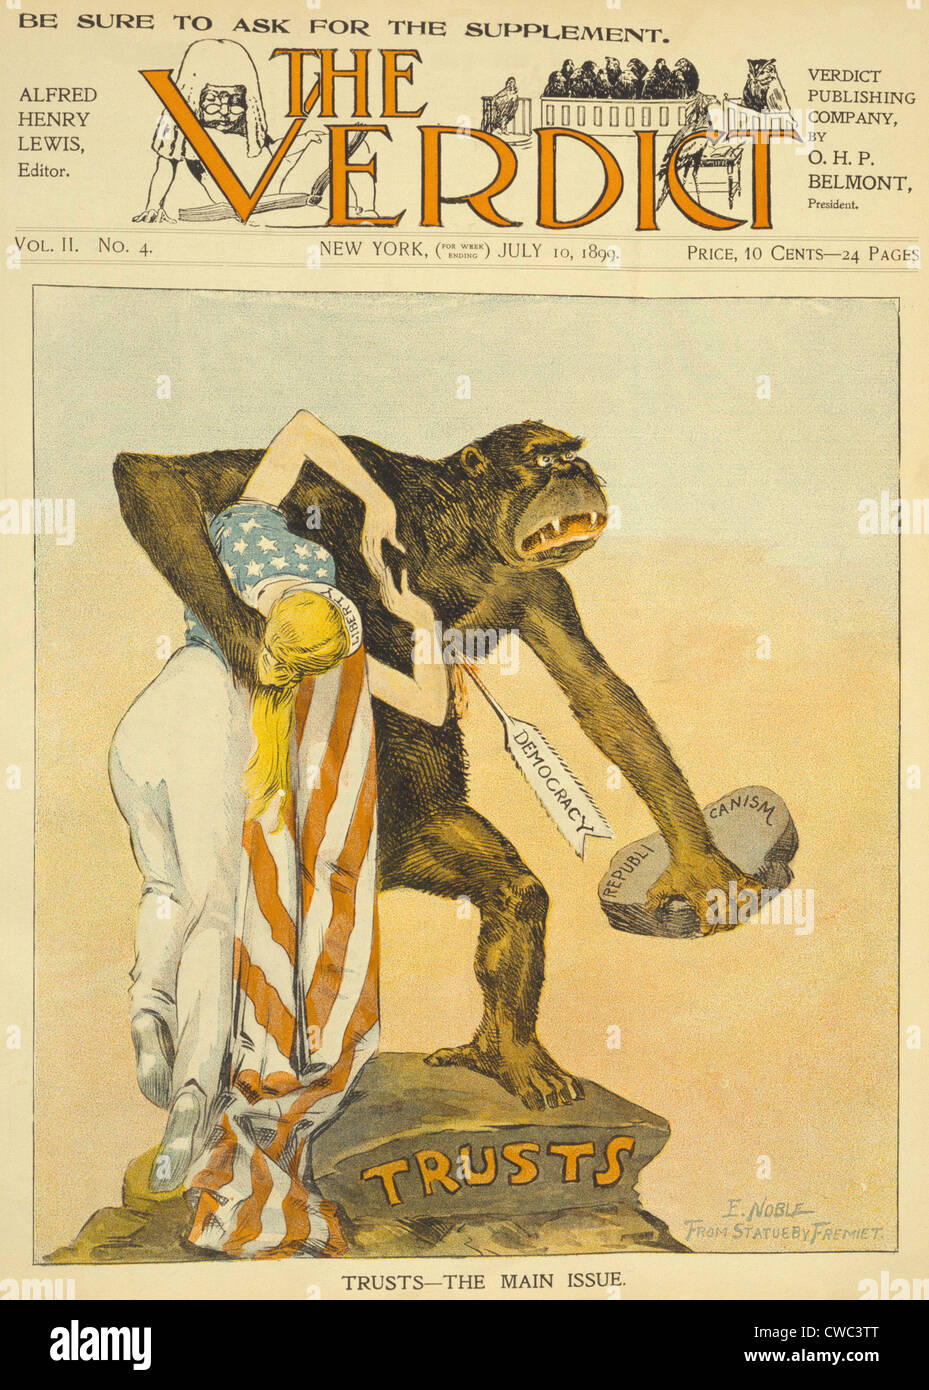 TRUST-THE MAIN ISSUE. Anti-trust and anti-Republican Party cartoon by E. Noble on the cover of VERDICT. An ape representing Stock Photo